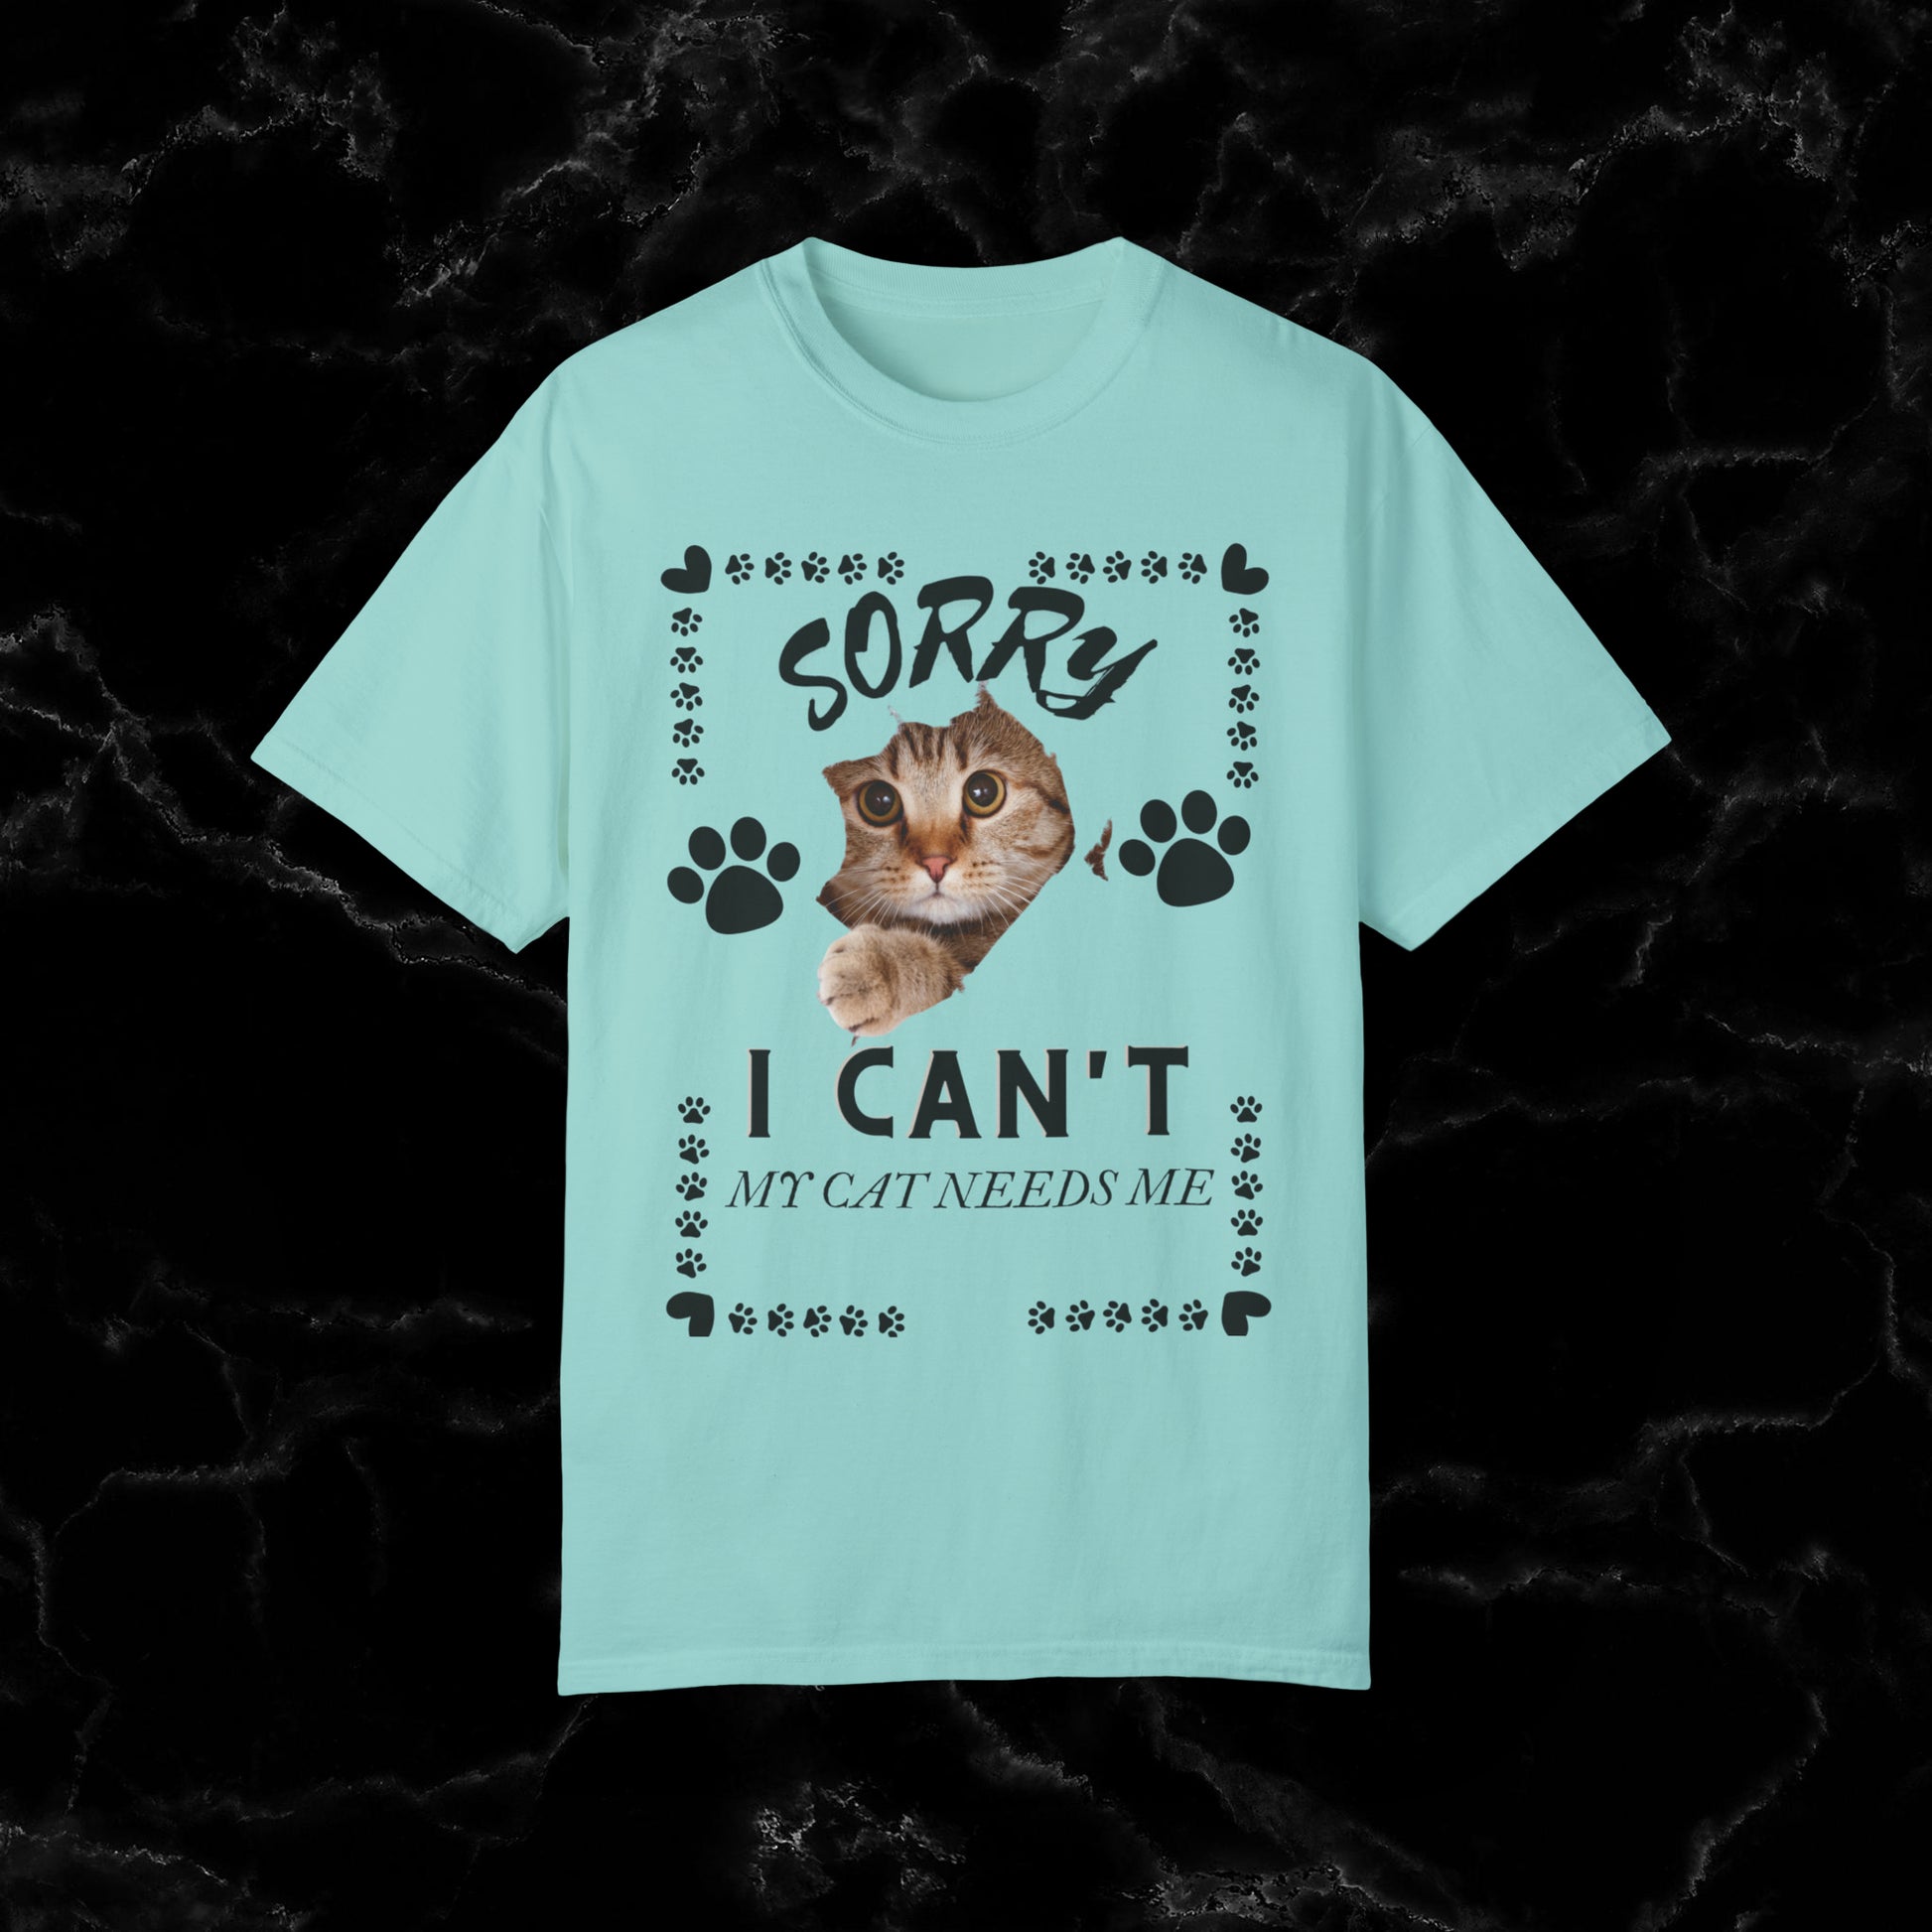 Sorry I Can't, My Cat Needs Me T-Shirt - Perfect Gift for Cat Moms and Animal Lovers T-Shirt Chalky Mint S 